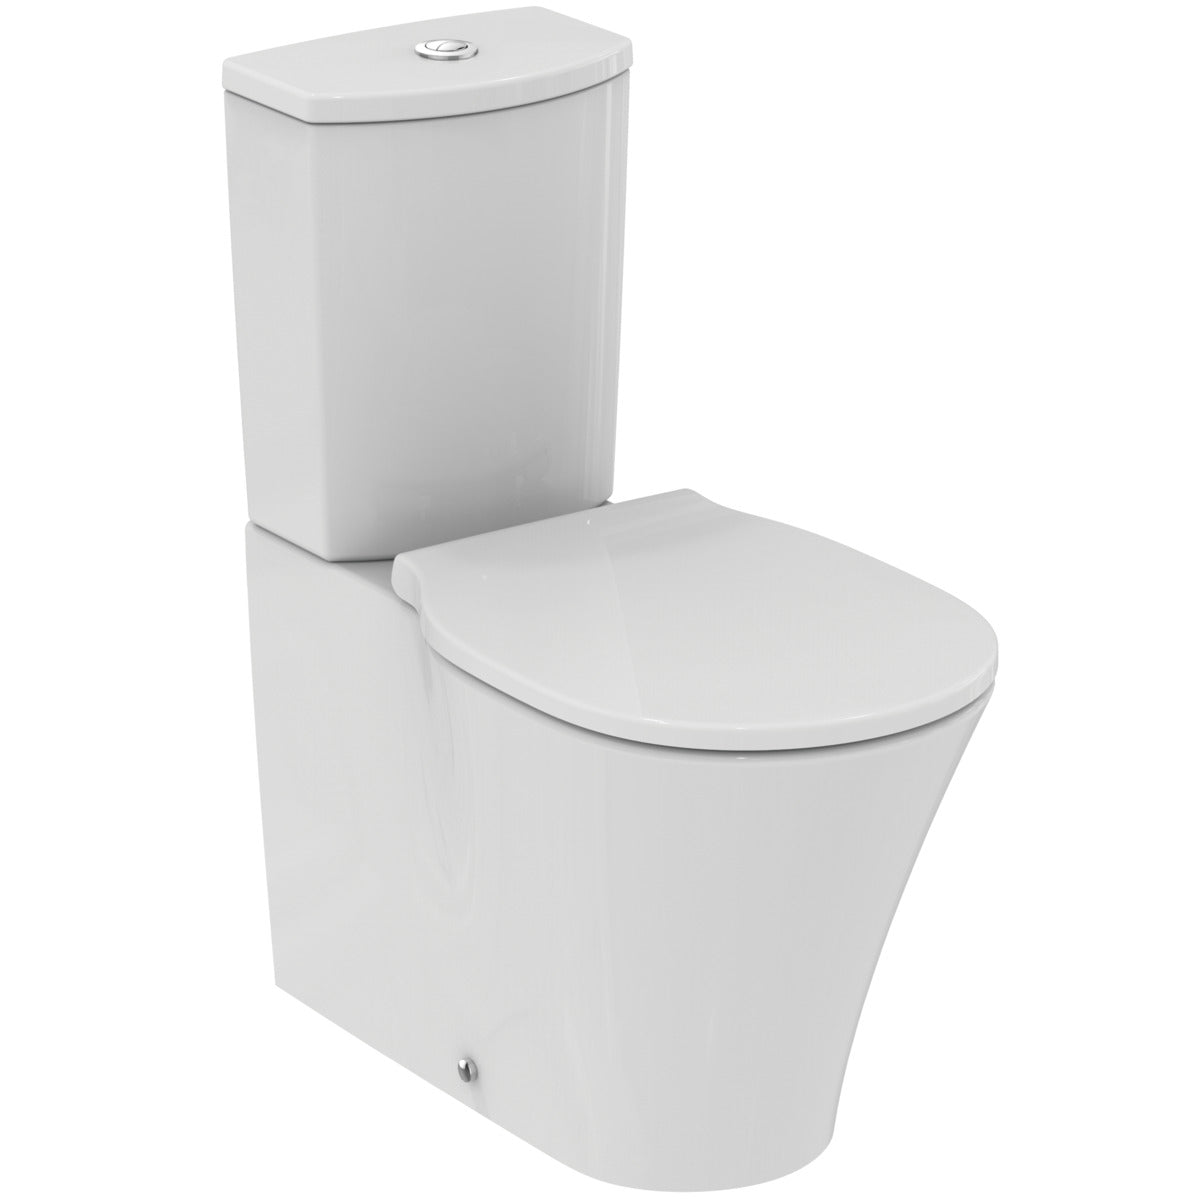 Ideal Standard Connect Air WC - Premium Toilets from Ideal Standard - Just GHS7950! Shop now at Kimo in Ghana